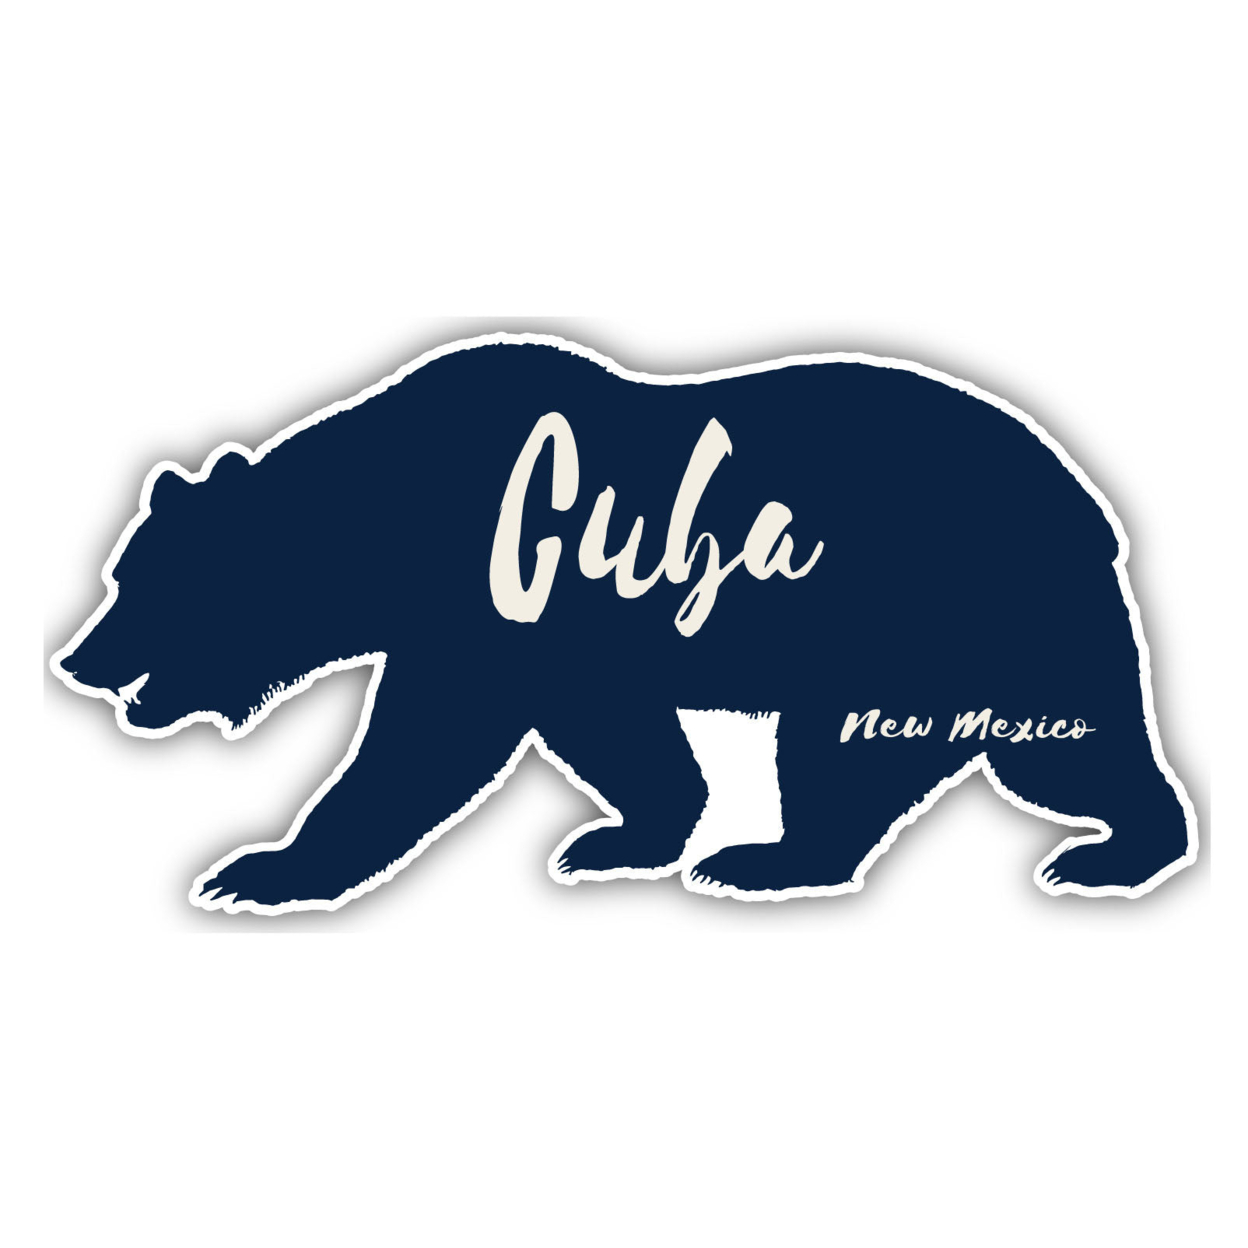 Cuba New Mexico Souvenir Decorative Stickers (Choose Theme And Size) - 4-Pack, 6-Inch, Bear